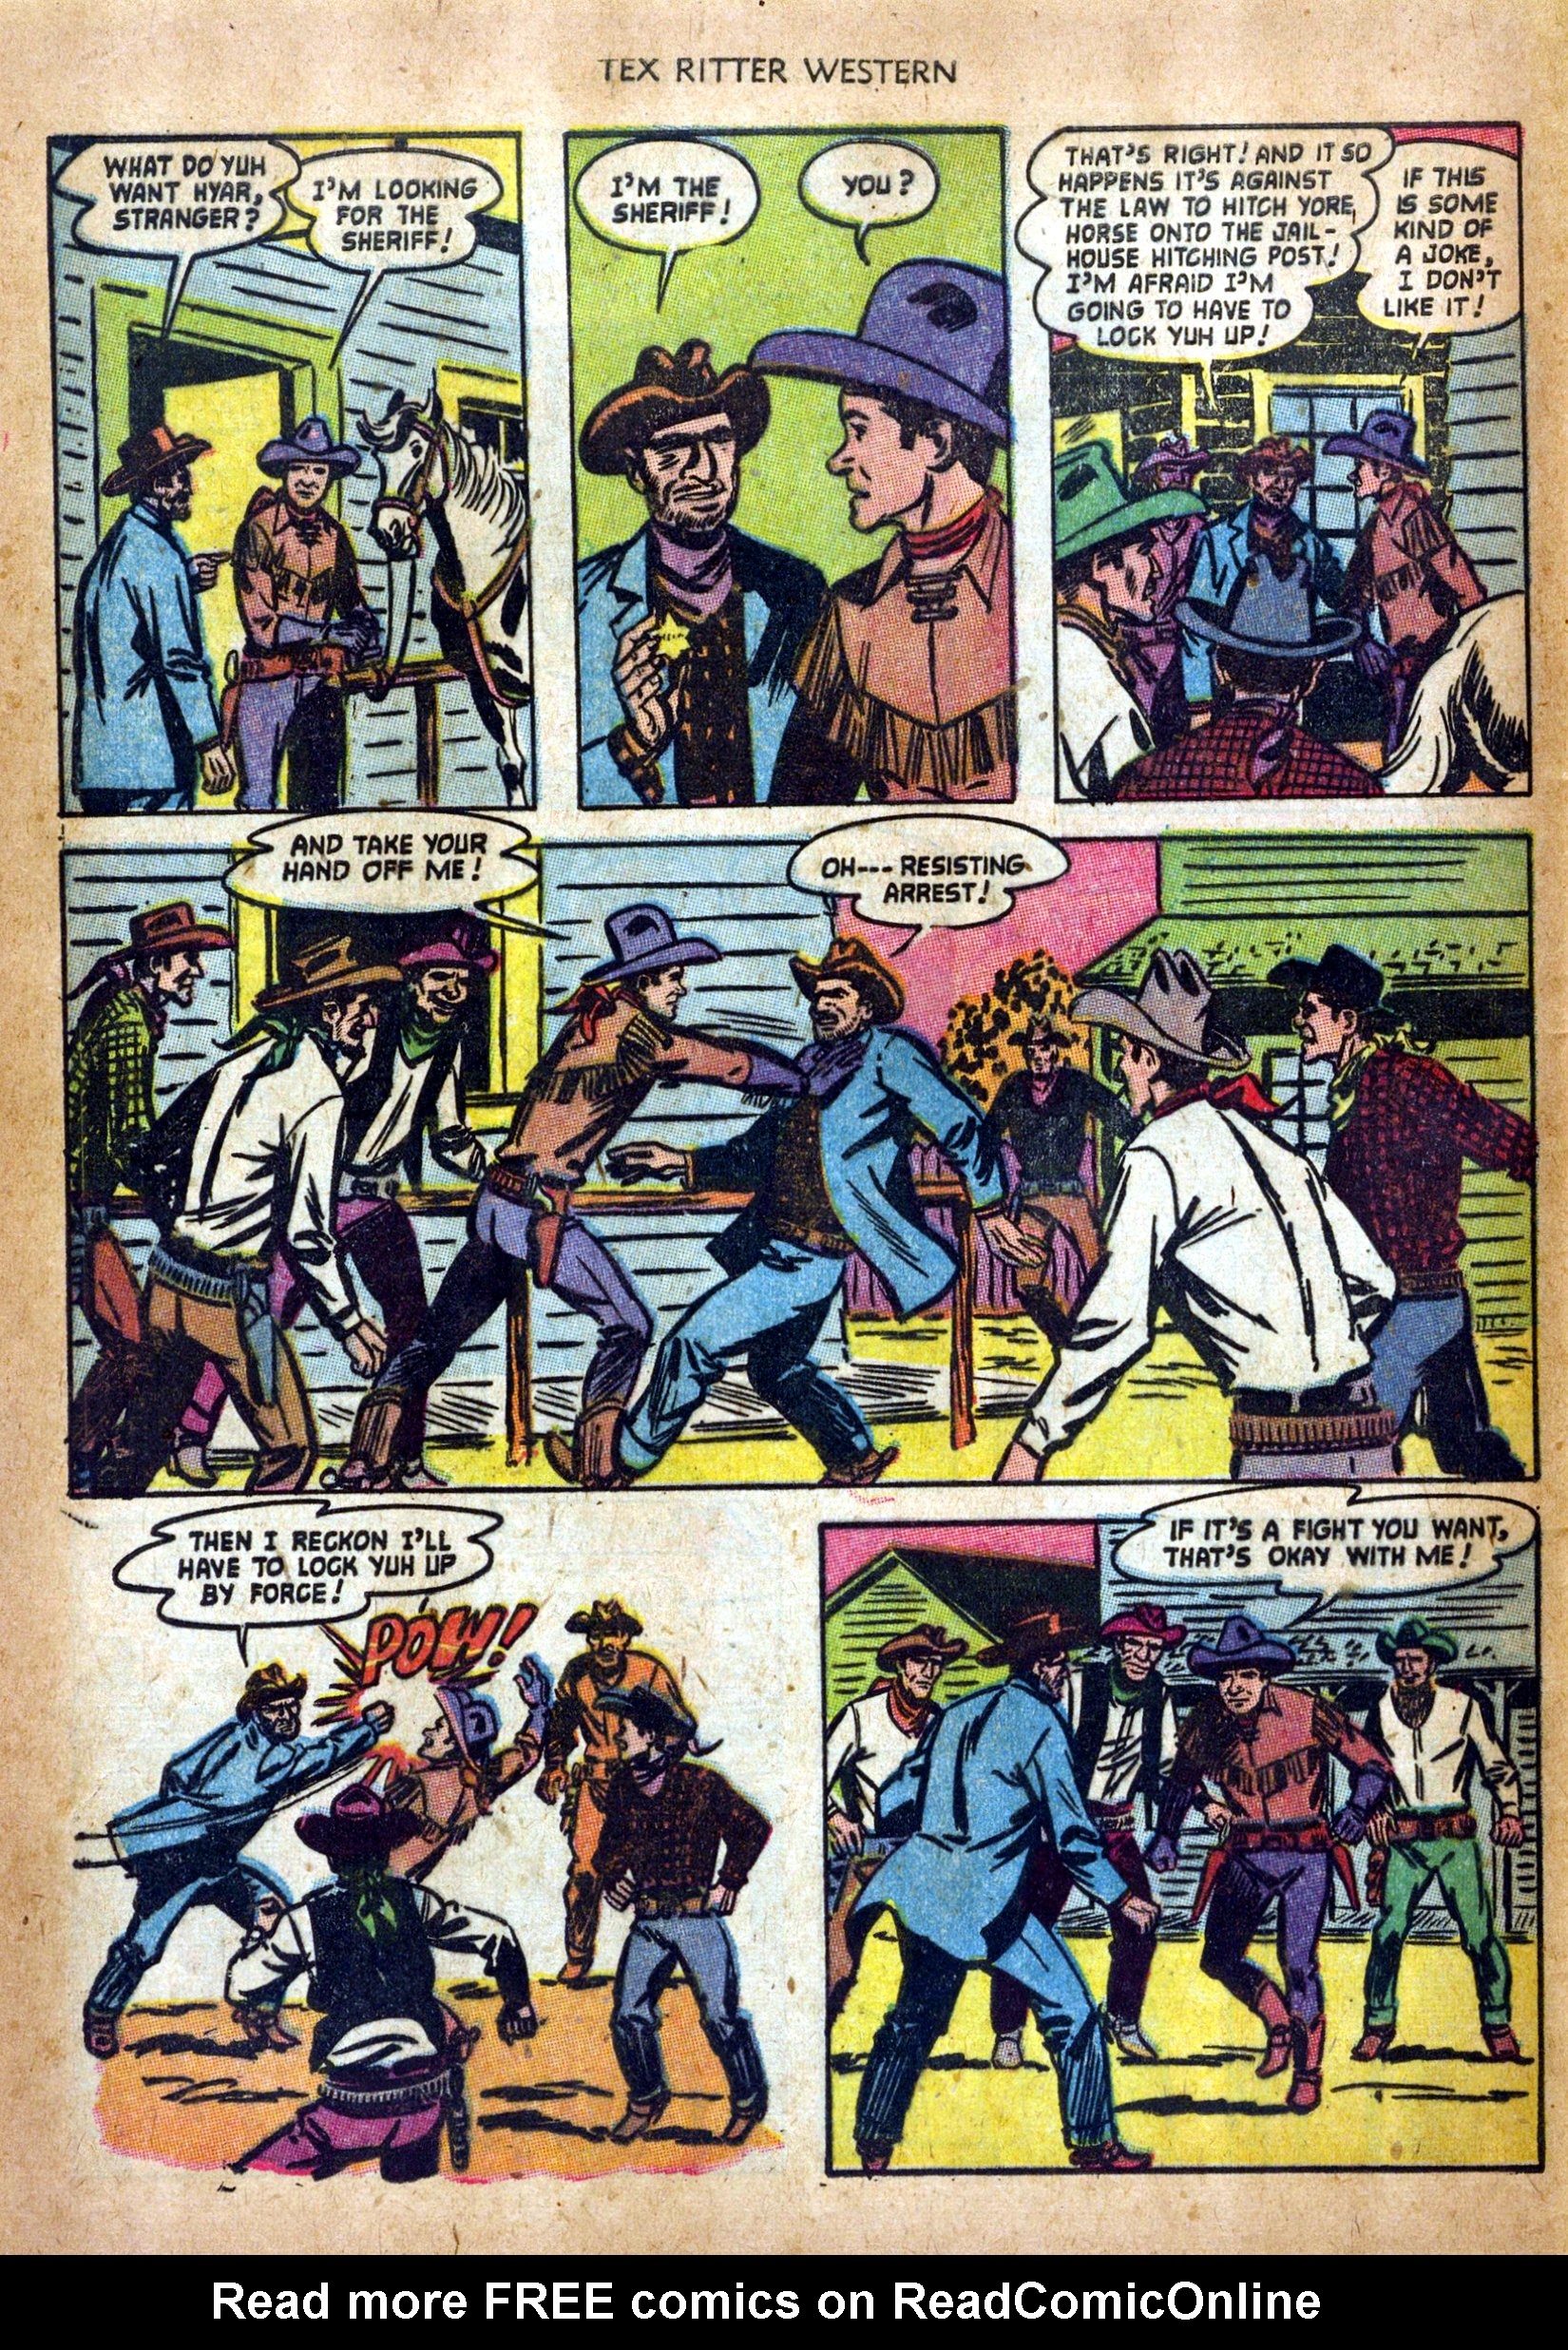 Read online Tex Ritter Western comic -  Issue #17 - 8